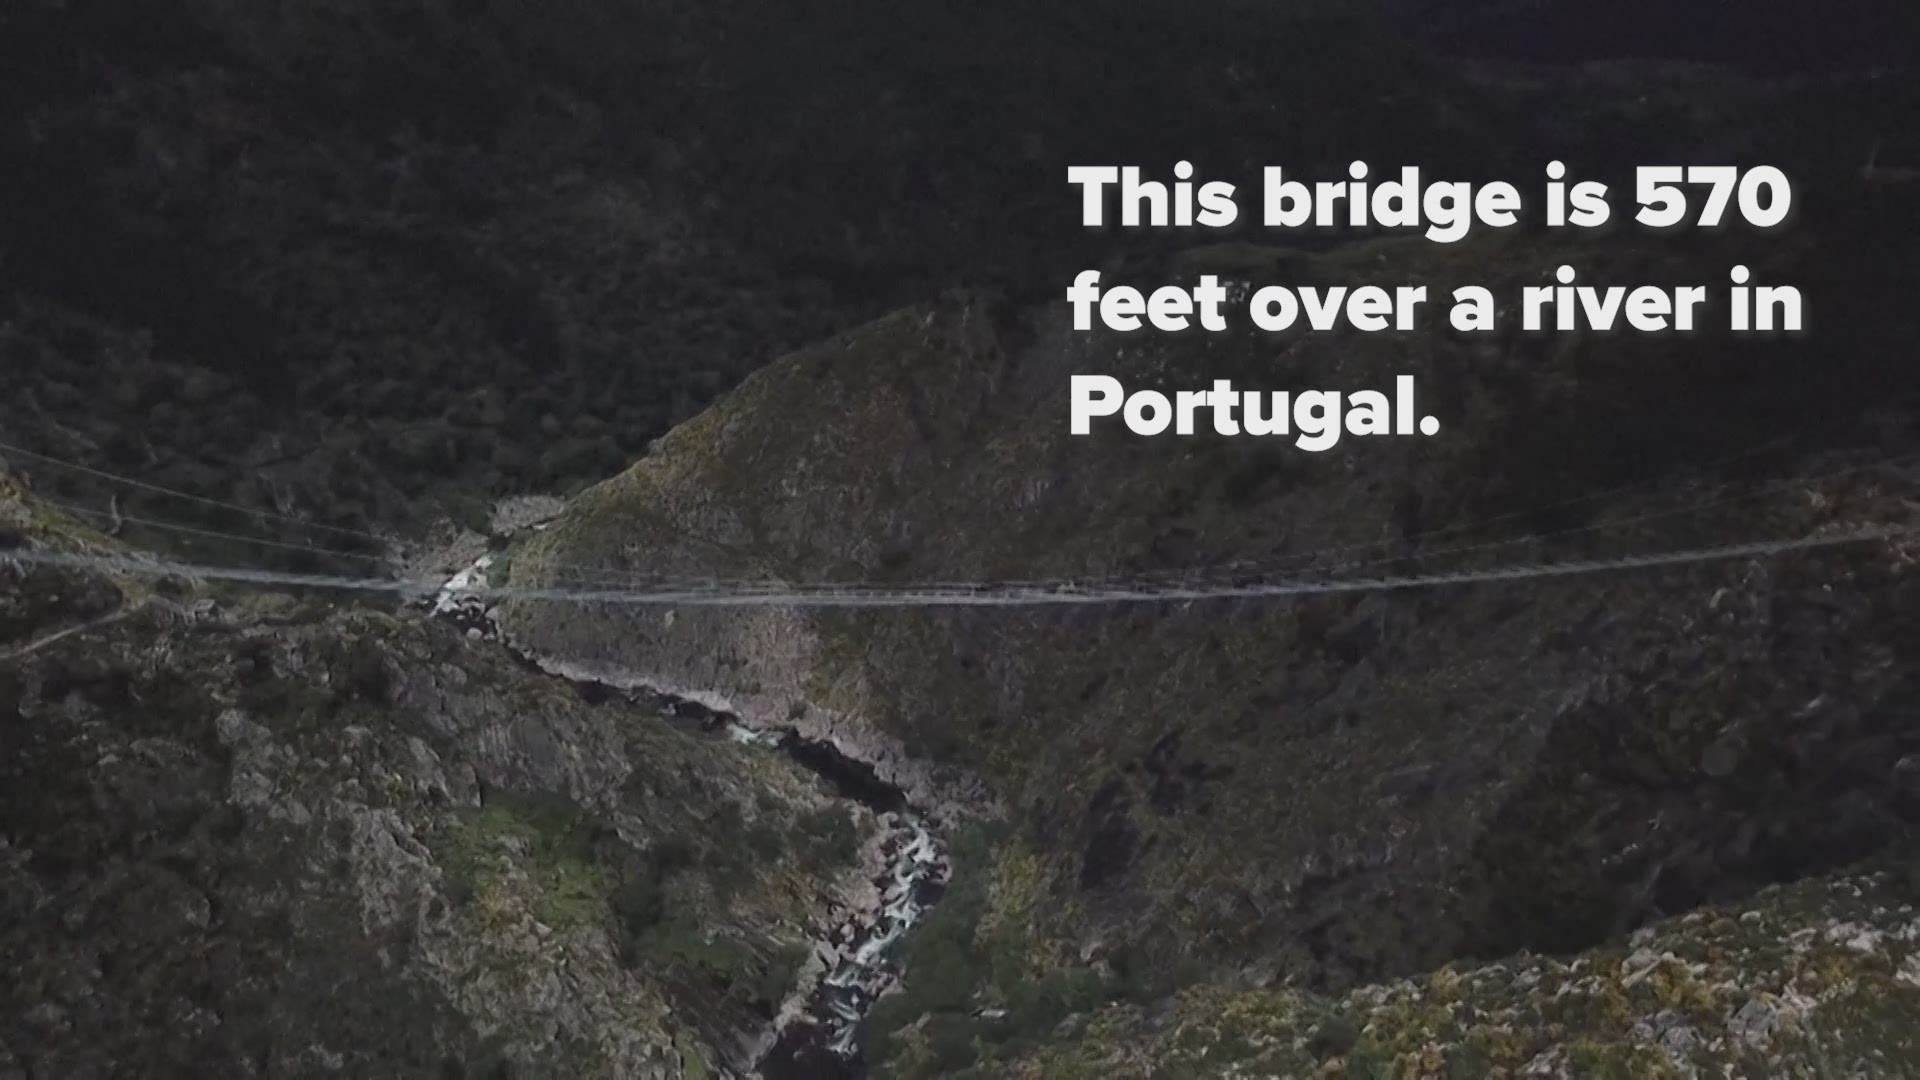 The Arouca Bridge stretches nearly one-third of a mile across a gorge over the Paiva River as it flows through a waterfall.